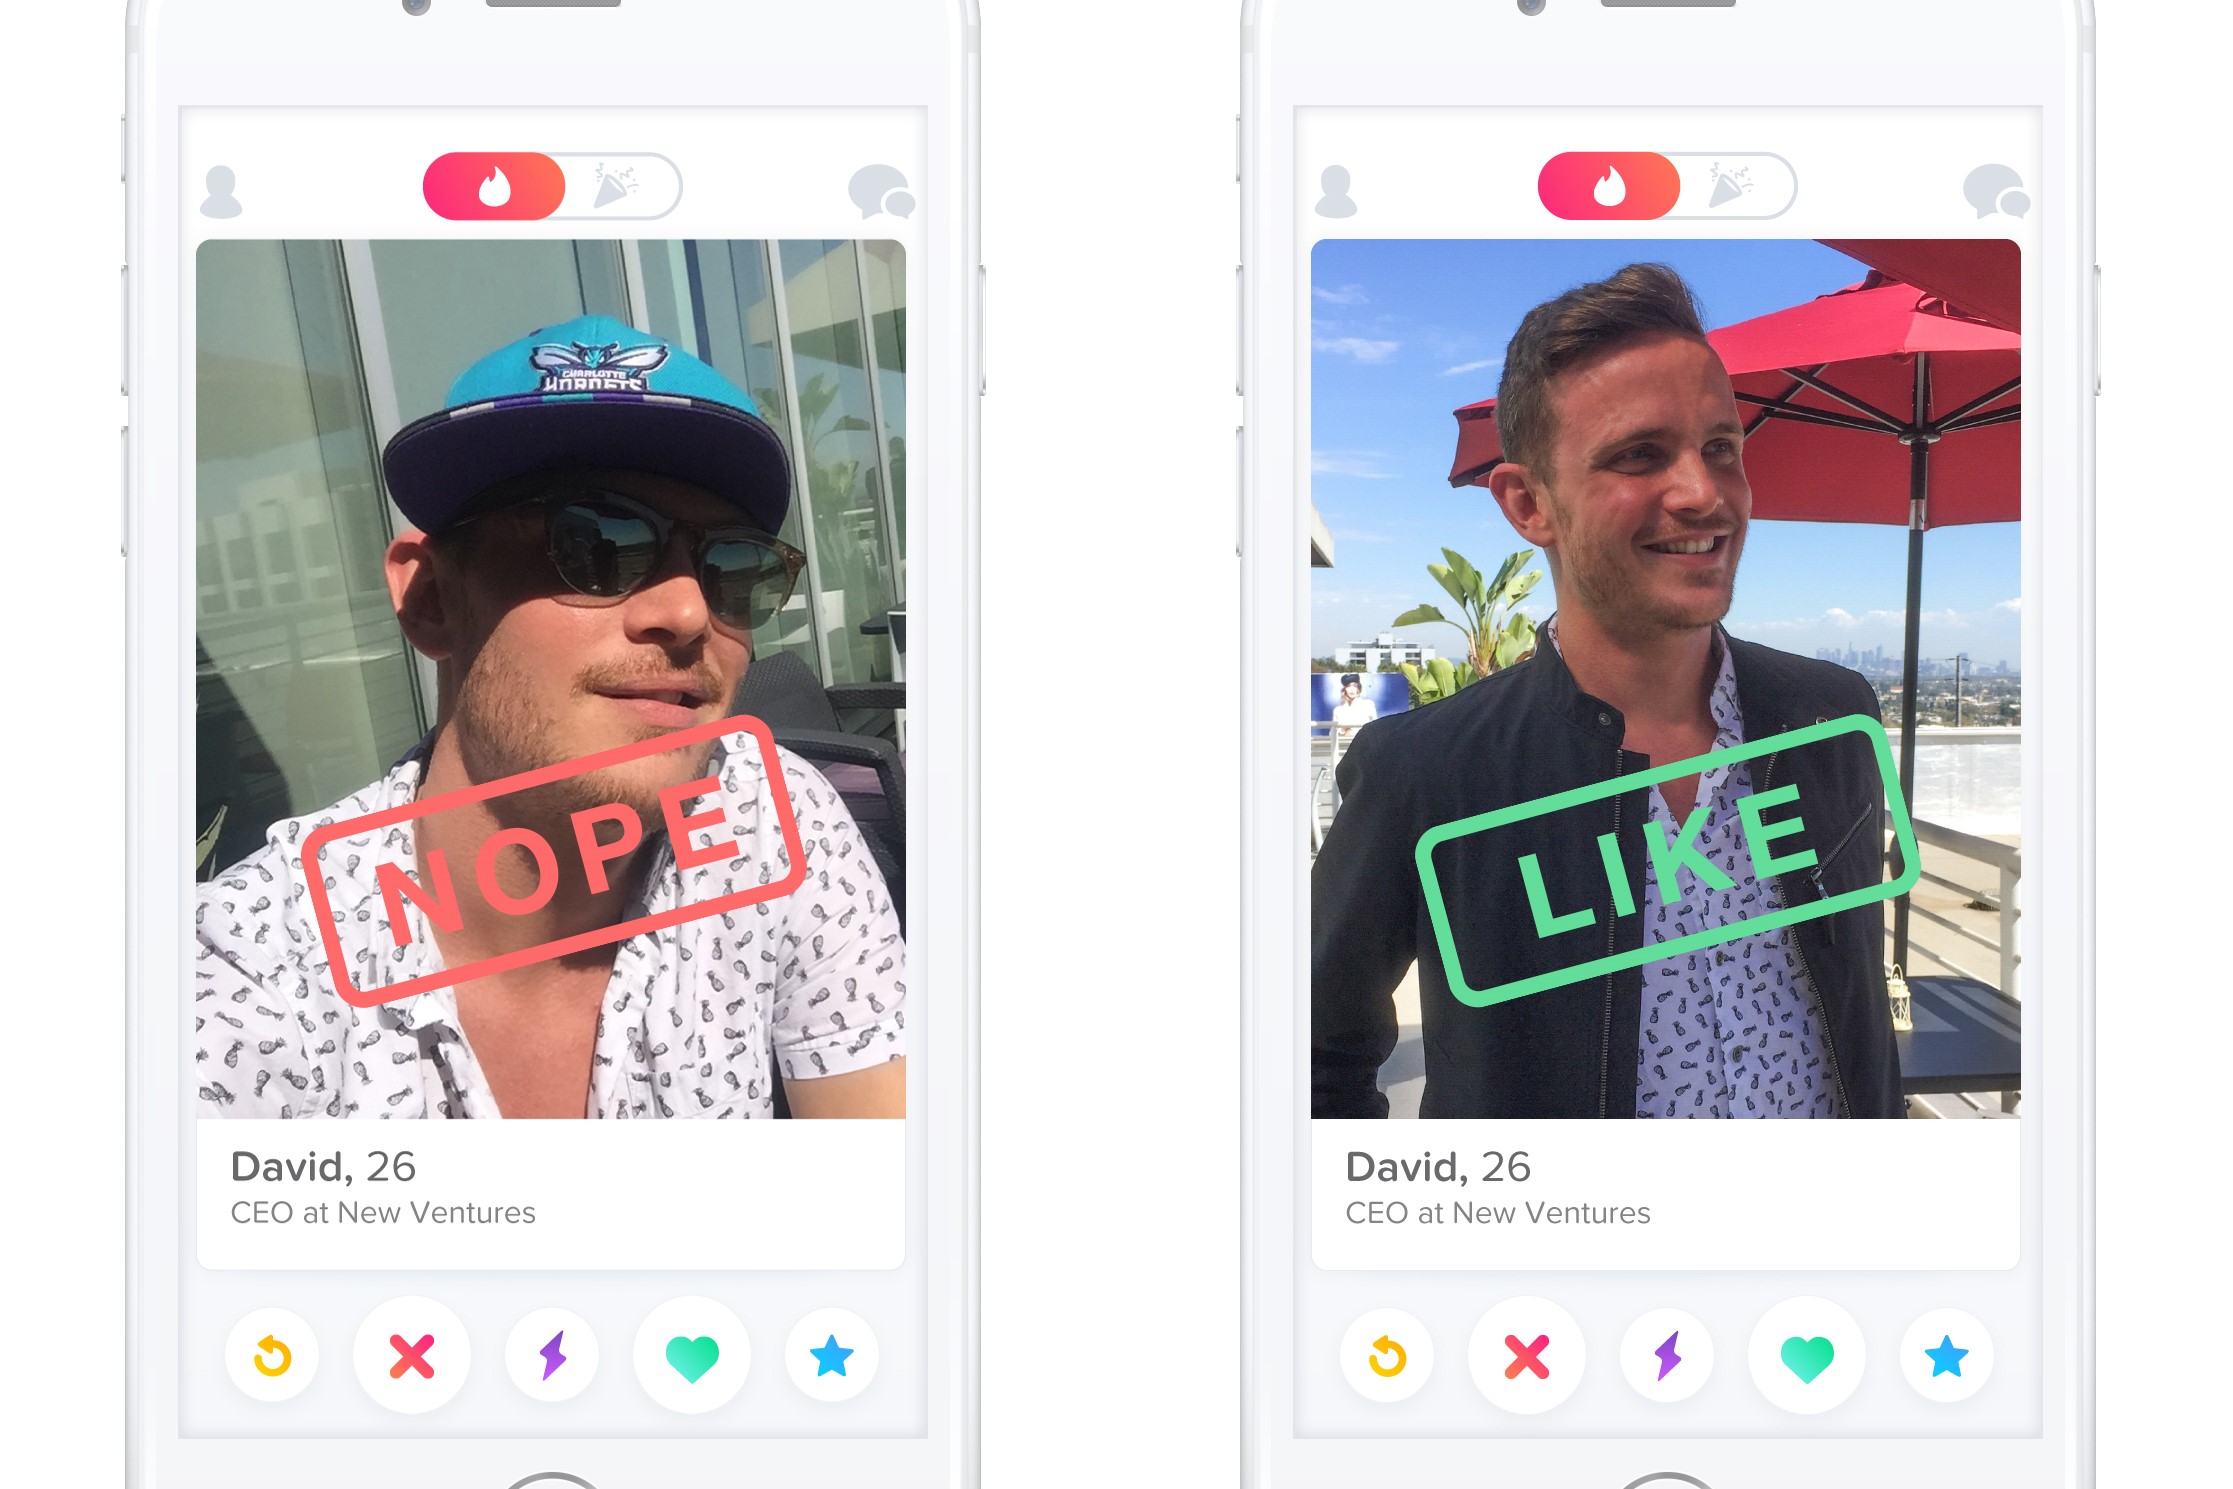 Tinder recently took the world by storm creating millions of matches with b...